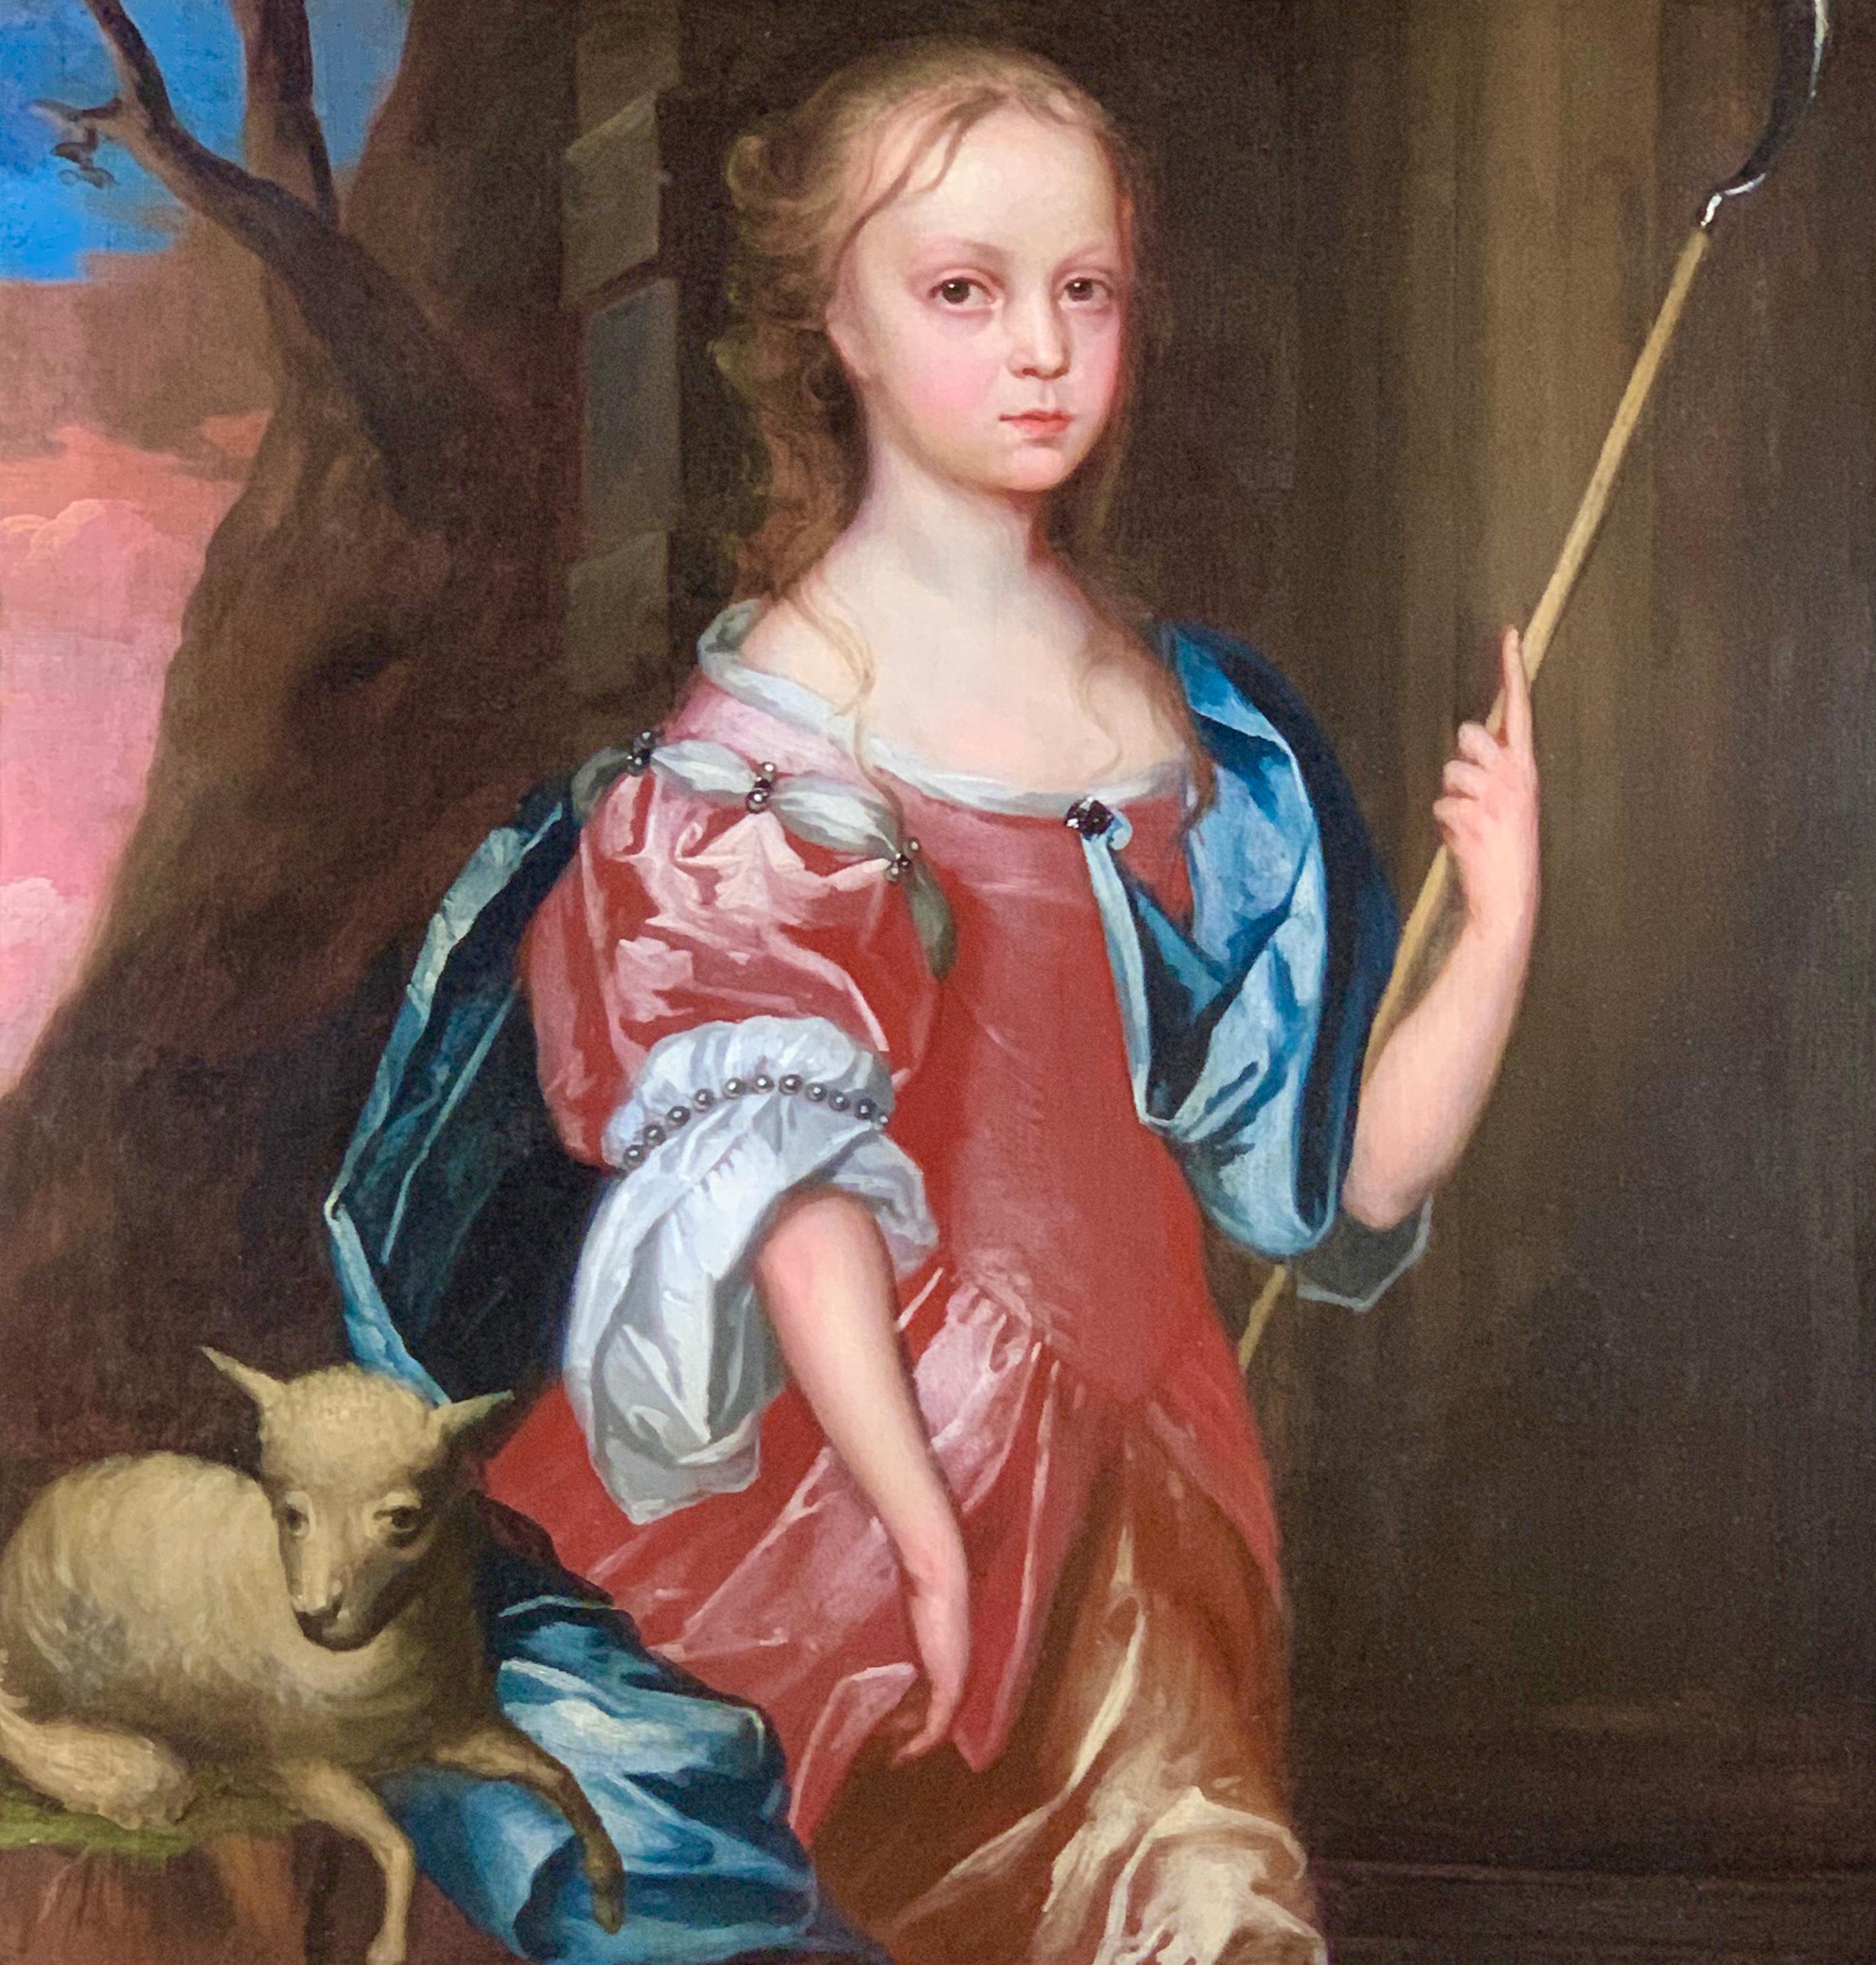 17th Century English Oil Portrait of a Young Girl as a Shepherdess - Painting by Circle of Gerard Soest